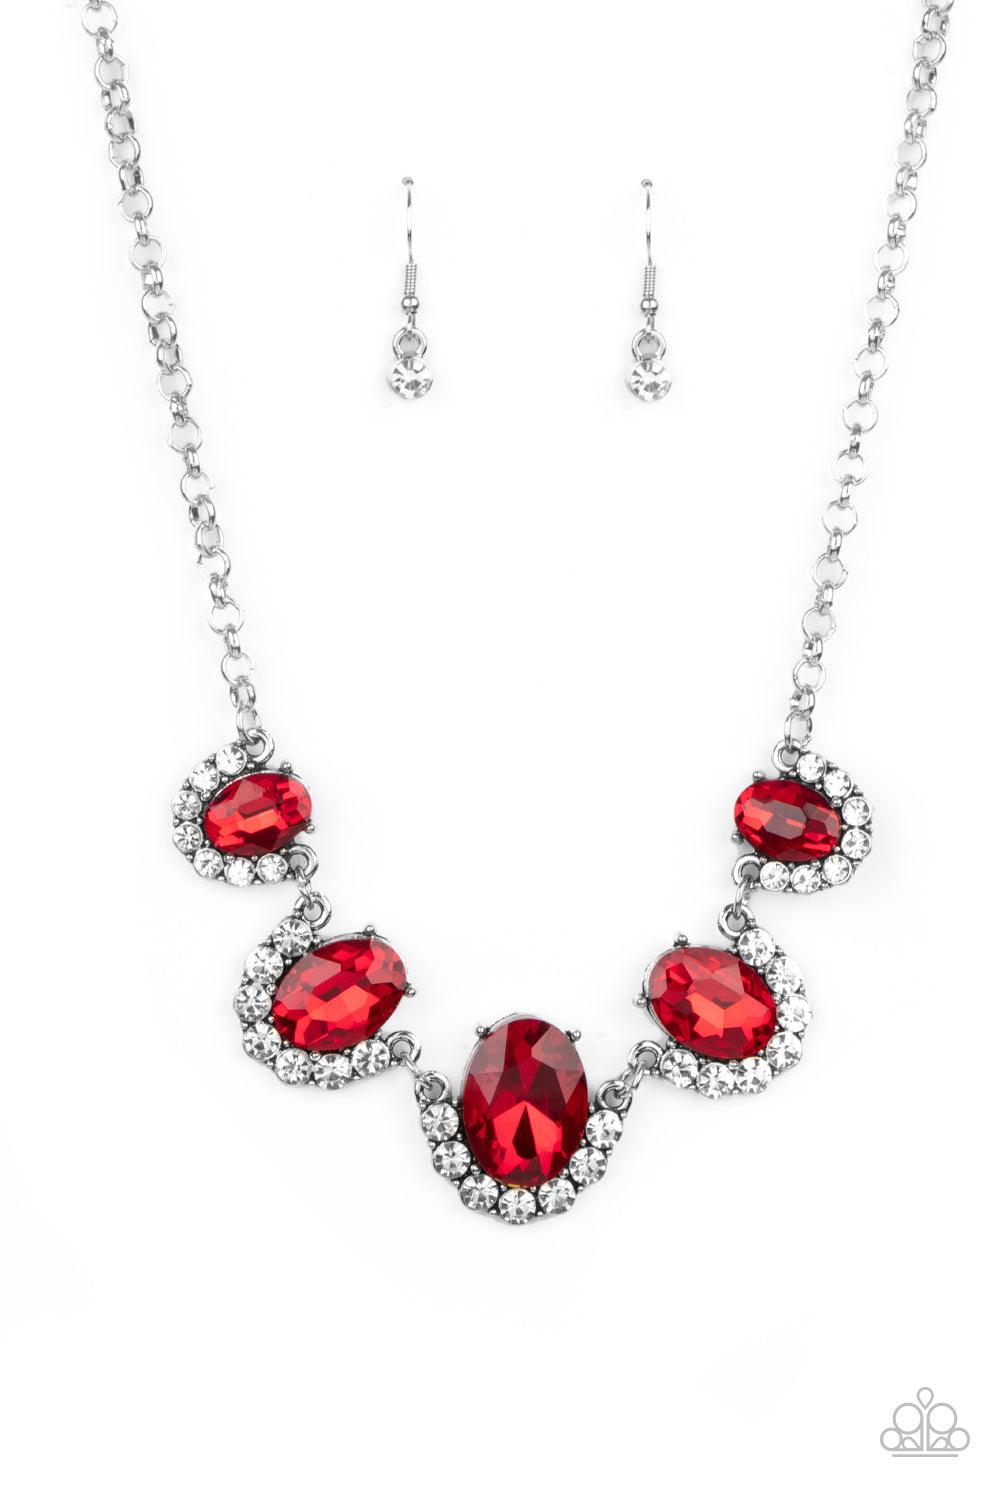 Paparazzi Accessories The Queen Demands It - Red Gradually increasing in size at the center, the sparkly bottoms of oversized red gems are bordered in rows of glassy white rhinestones as they link below the collar for a dramatic effect. Features an adjust